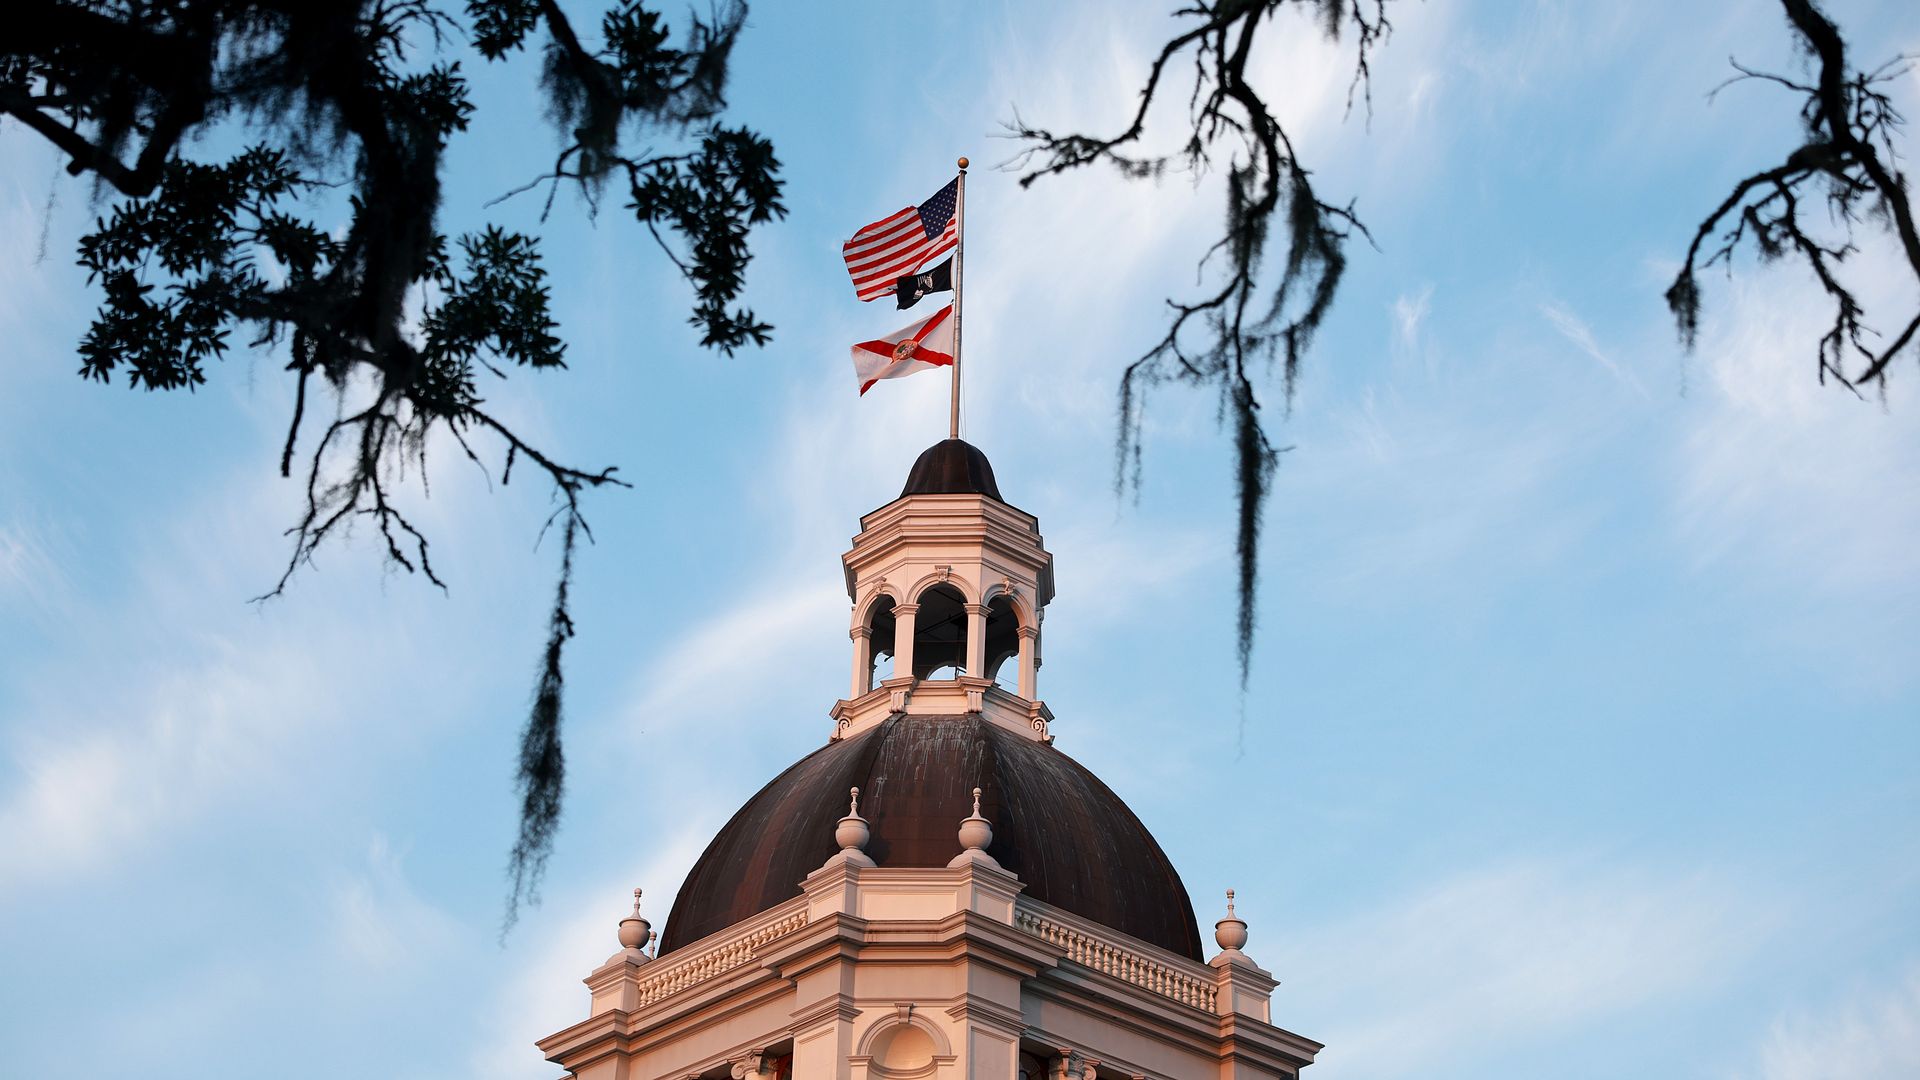 Image of the Florida Historic Capitol with the U.S. flag flying above the state flag. A tree is in the foreground.